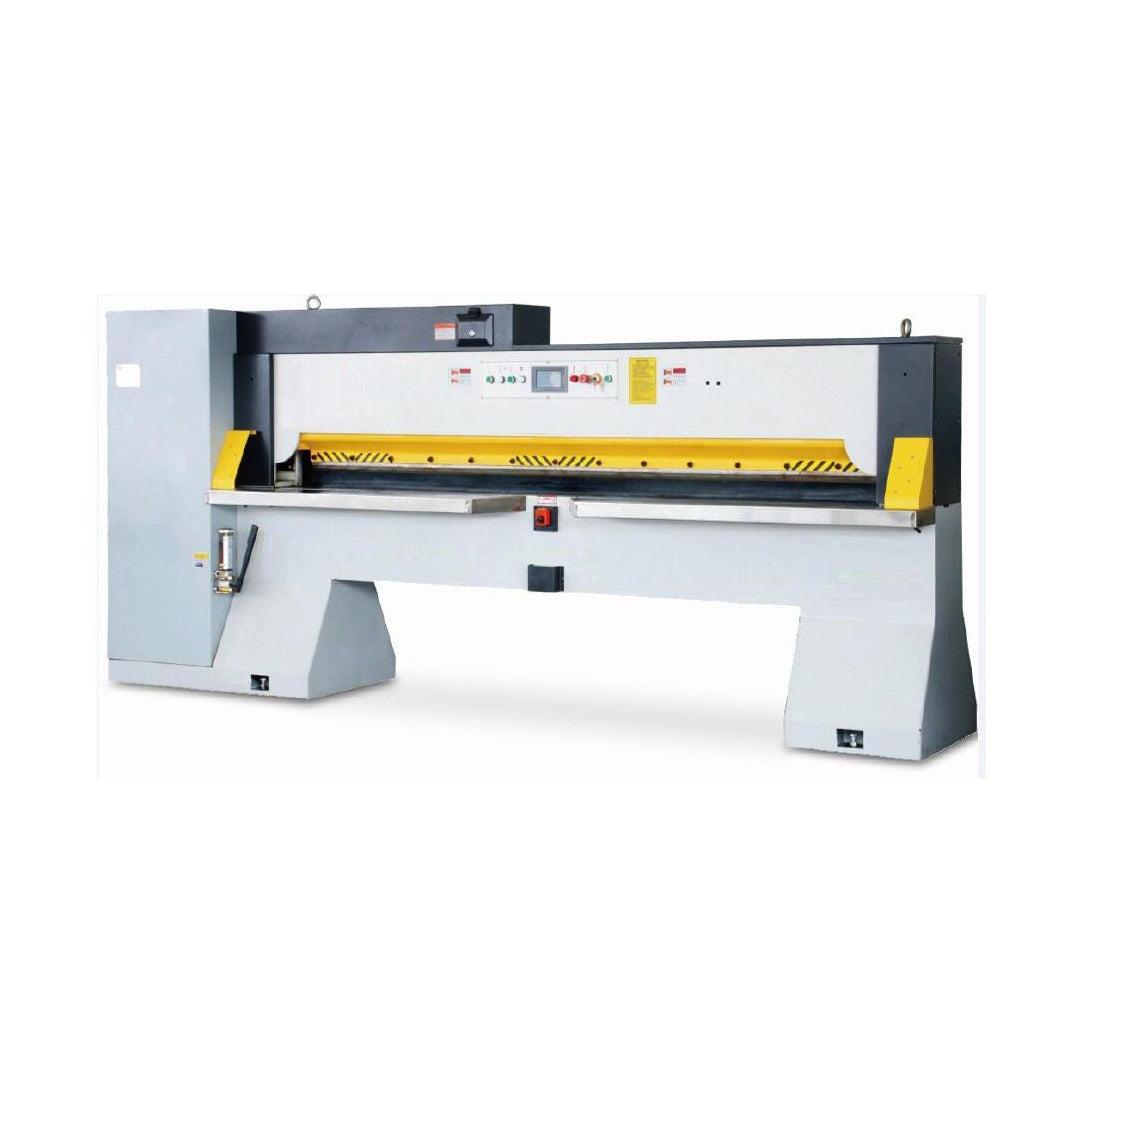 Hydraulic Veneer Clippers HVC 2031 by ToughCut